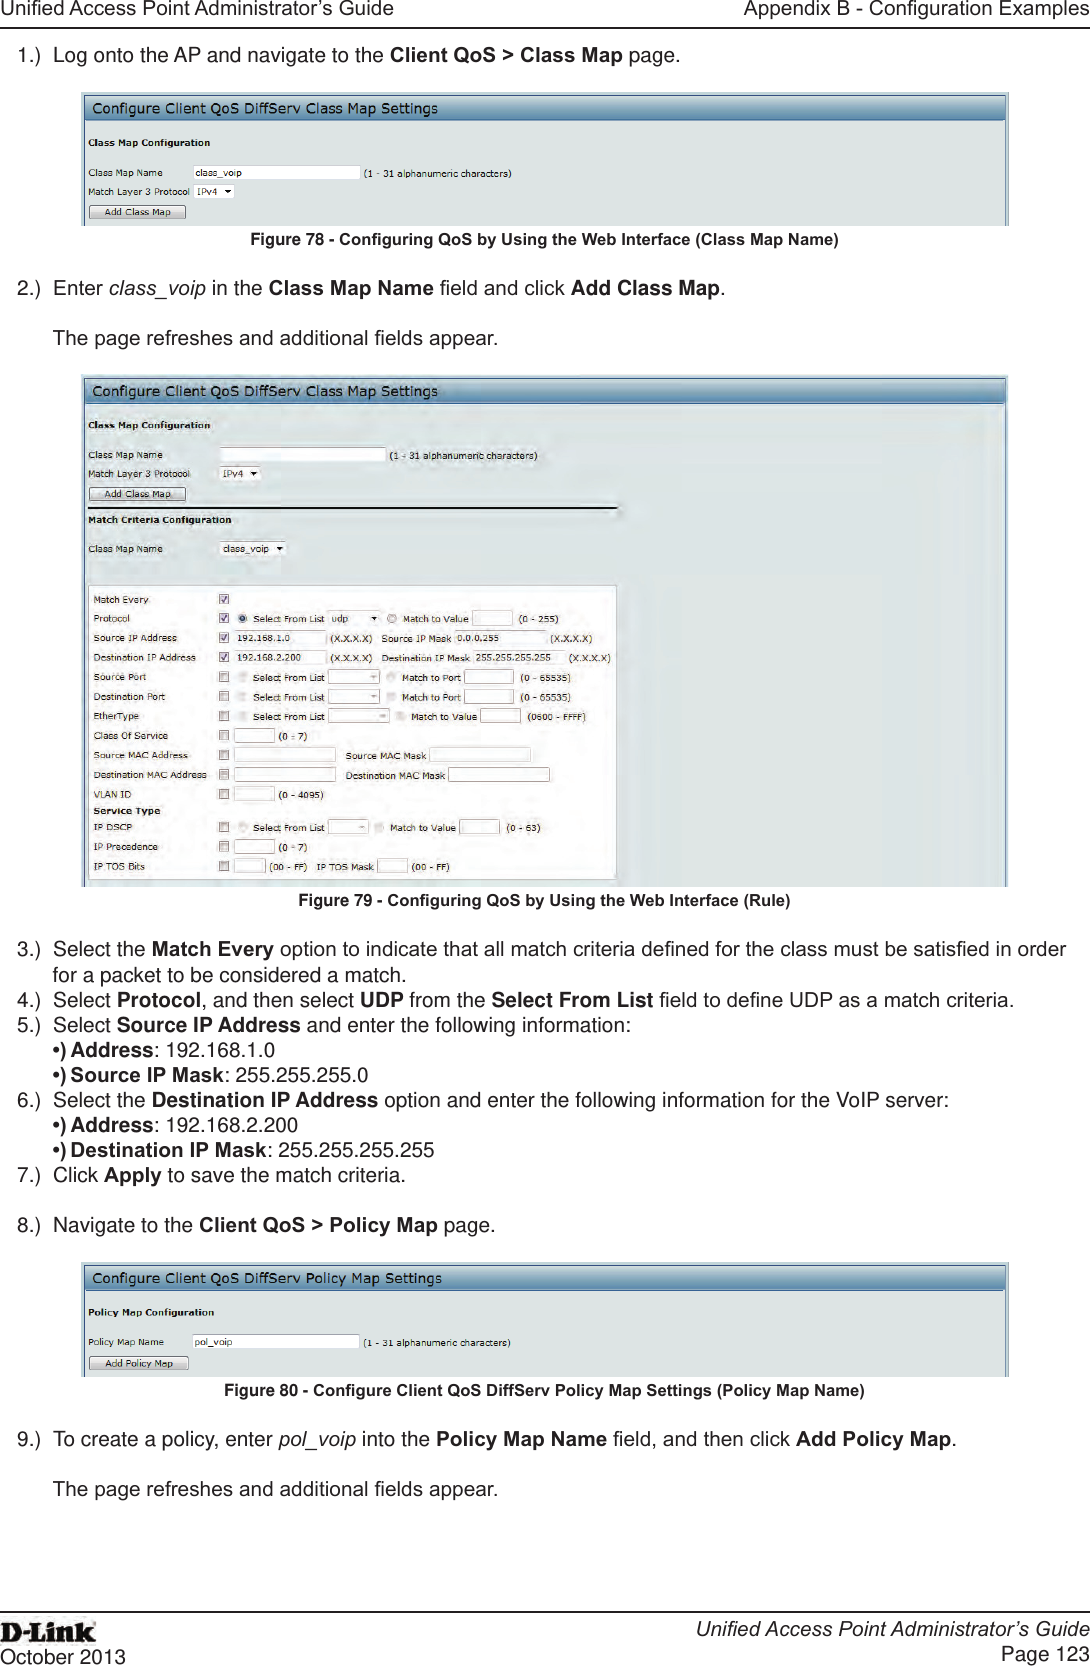 Unied Access Point Administrator’s GuideUnied Access Point Administrator’s GuidePage 123October 2013Appendix B - Conguration Examples1.)  Log onto the AP and navigate to the Client QoS &gt; Class Map page.Figure 78 - Conguring QoS by Using the Web Interface (Class Map Name)2.)  Enter class_voip in the Class Map Name eld and click Add Class Map.The page refreshes and additional elds appear. Figure 79 - Conguring QoS by Using the Web Interface (Rule)3.)  Select the Match Every option to indicate that all match criteria dened for the class must be satised in order for a packet to be considered a match.4.)  Select Protocol, and then select UDP from the Select From List eld to dene UDP as a match criteria. 5.)  Select Source IP Address and enter the following information: •) Address: 192.168.1.0•) Source IP Mask: 255.255.255.06.)  Select the Destination IP Address option and enter the following information for the VoIP server:•) Address: 192.168.2.200•) Destination IP Mask: 255.255.255.2557.)  Click Apply to save the match criteria.8.)  Navigate to the Client QoS &gt; Policy Map page.Figure 80 - Congure Client QoS DiffServ Policy Map Settings (Policy Map Name)9.)  To create a policy, enter pol_voip into the Policy Map Name eld, and then click Add Policy Map.The page refreshes and additional elds appear.